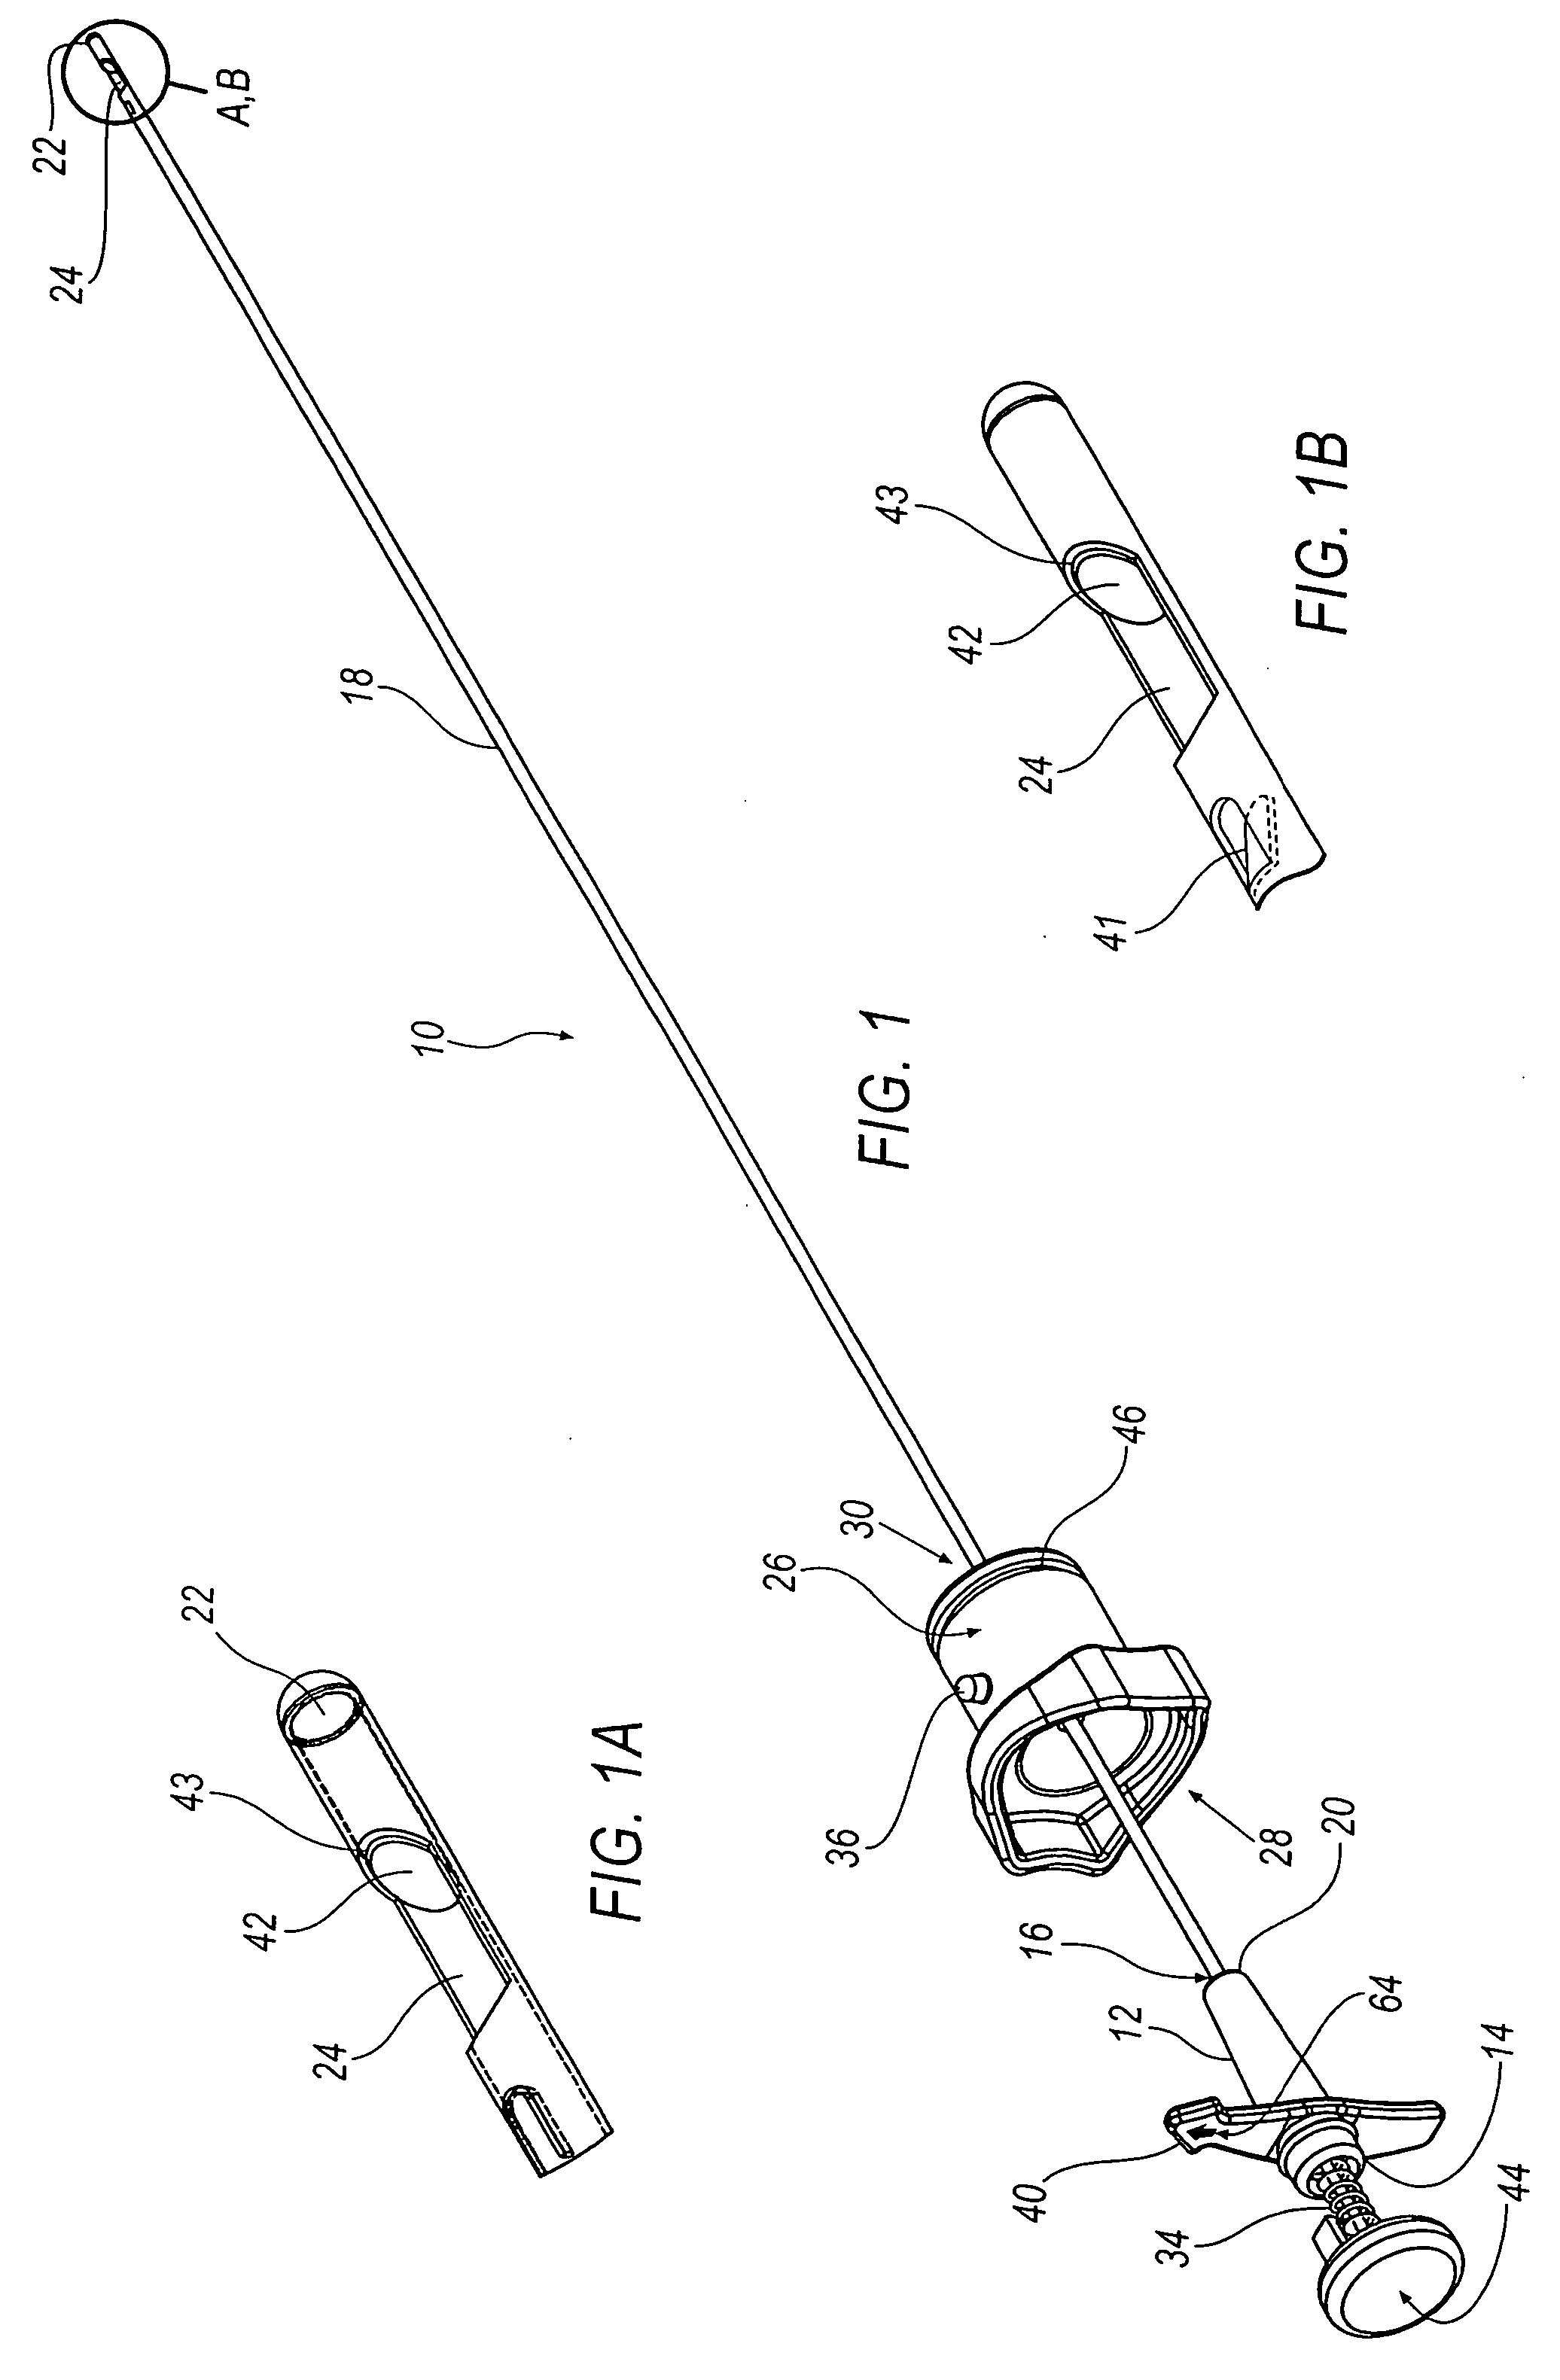 Surgical site marker delivery system